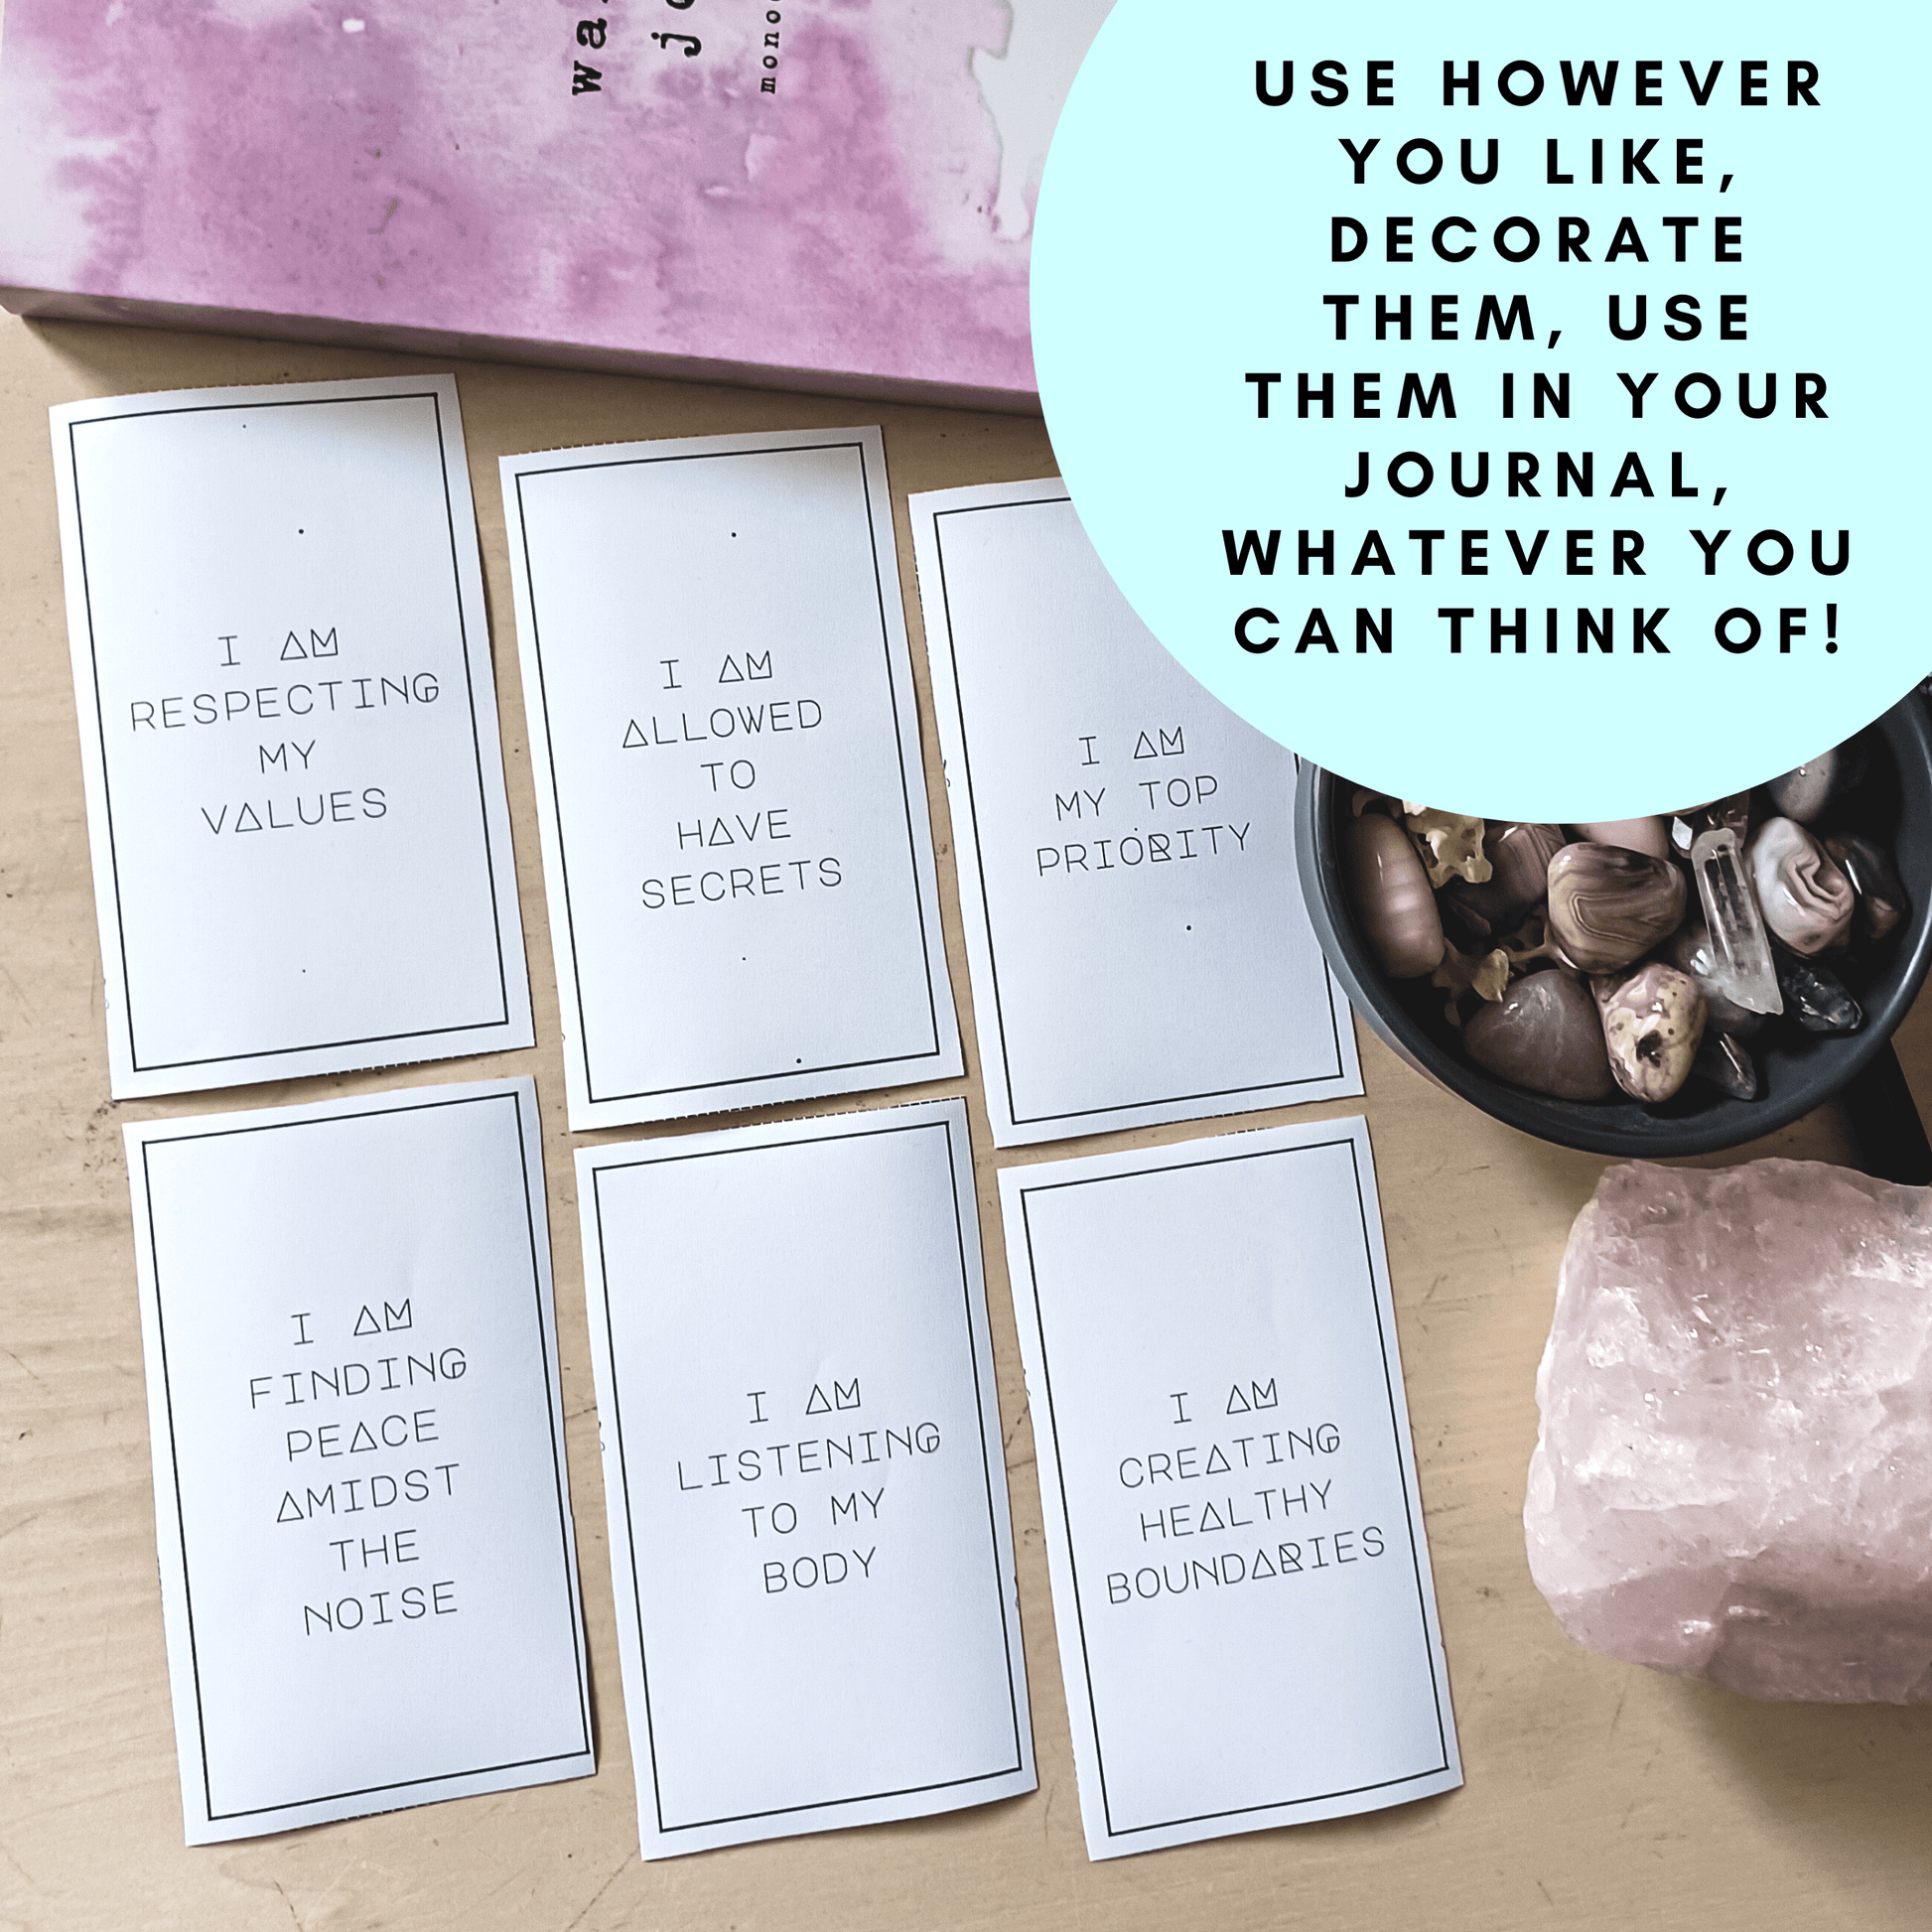 free gifts! i am: an affirmation deck 108 cards